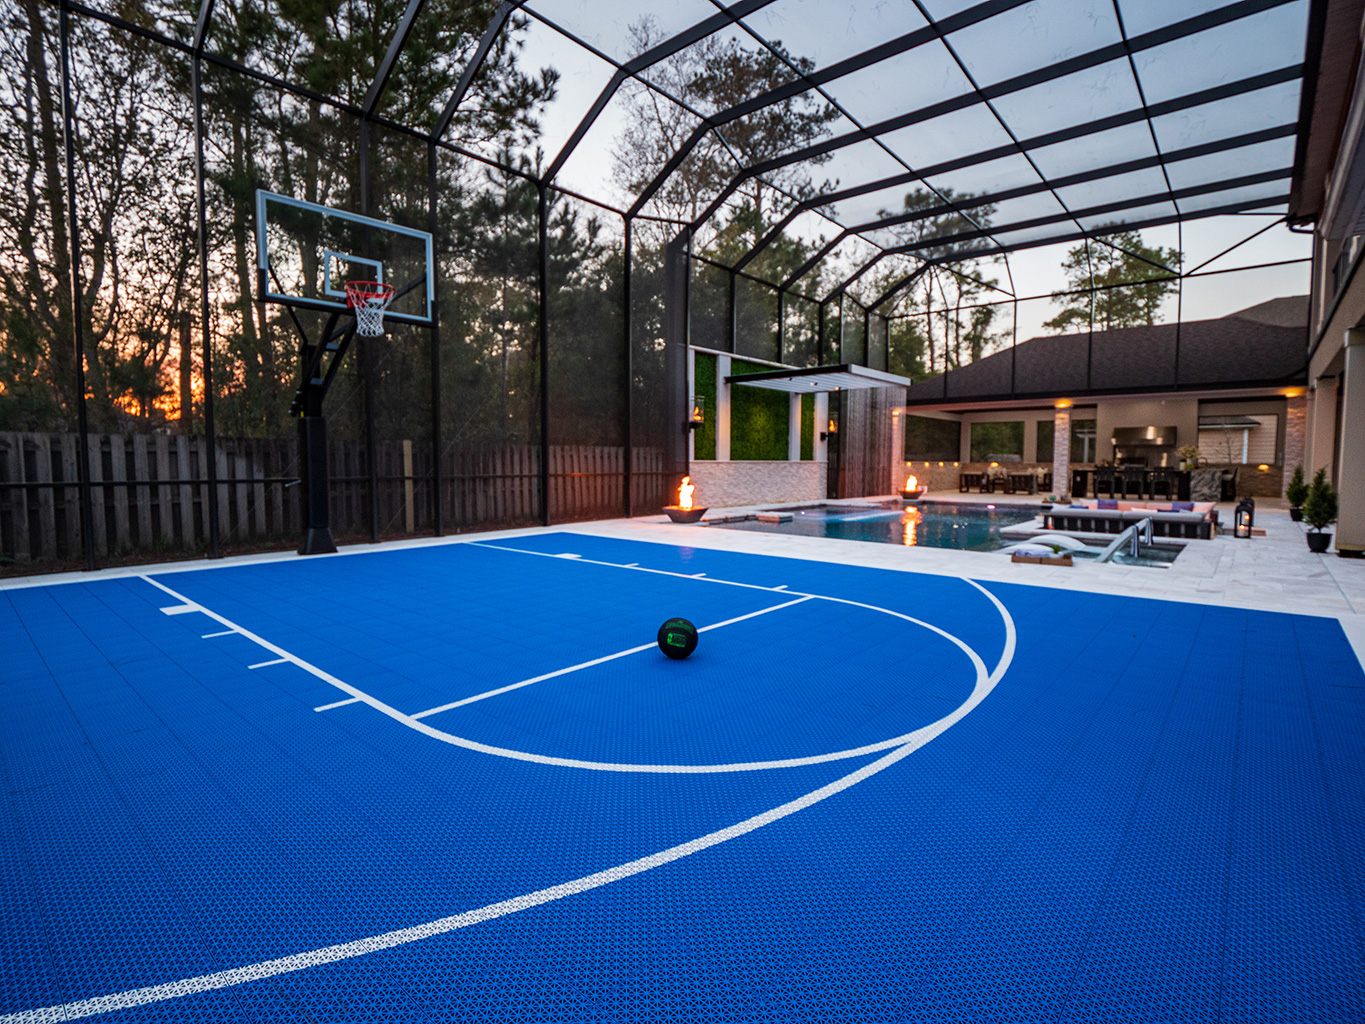 Luxury Outdoor Living | Featured image for “Baller’s Backyard”